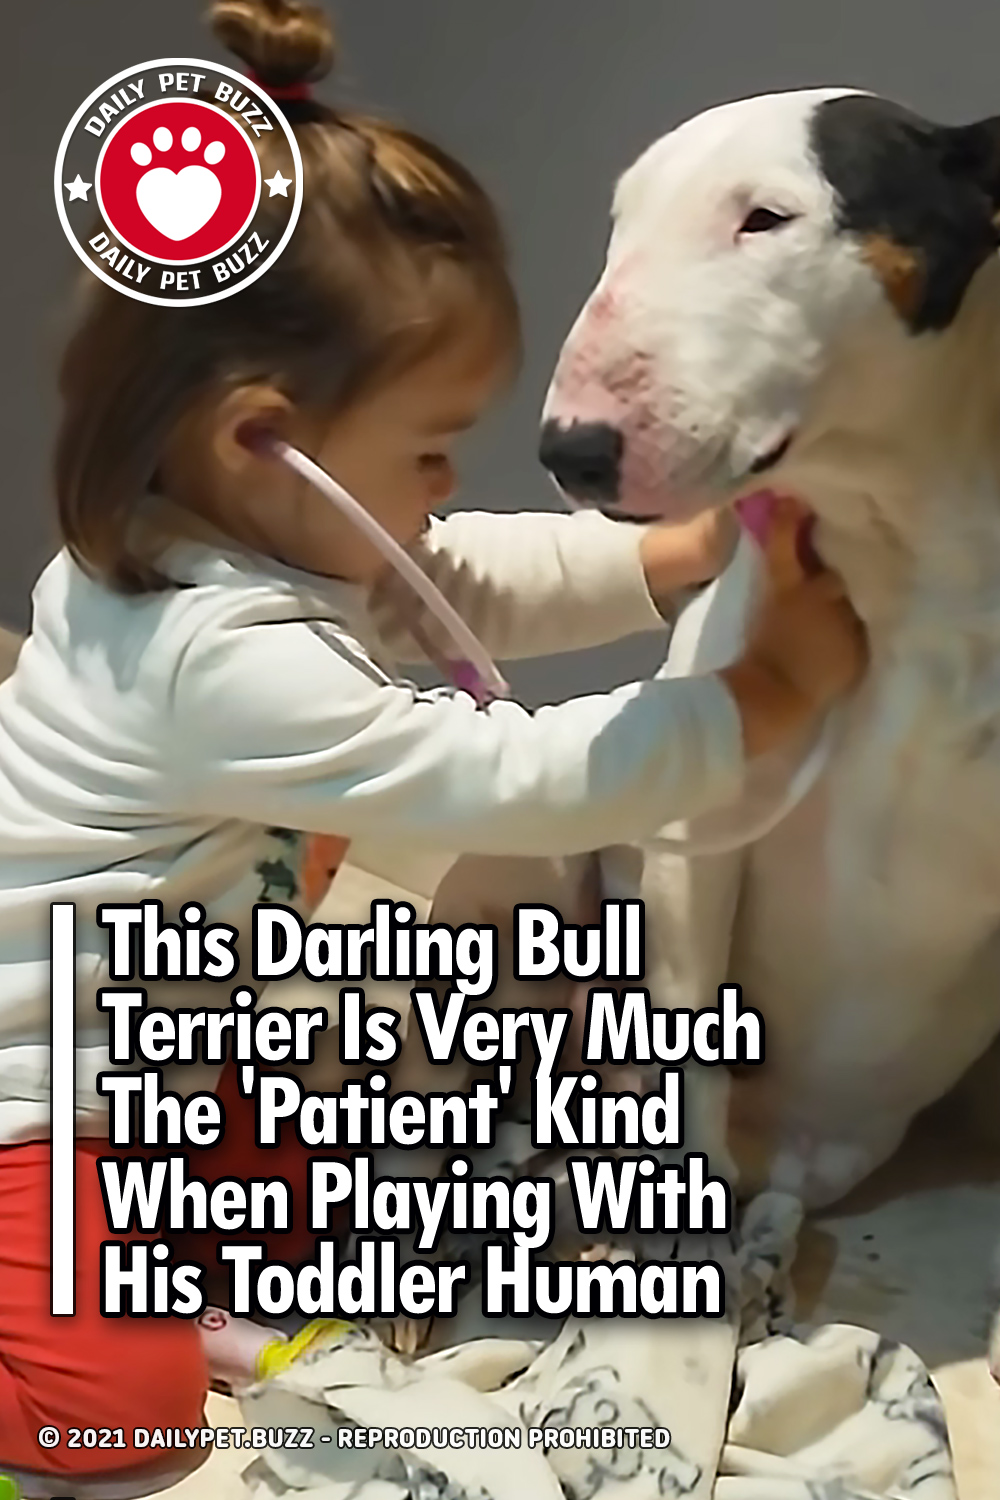 This Darling Bull Terrier Is Very Much The \'Patient\' Kind When Playing With His Toddler Human